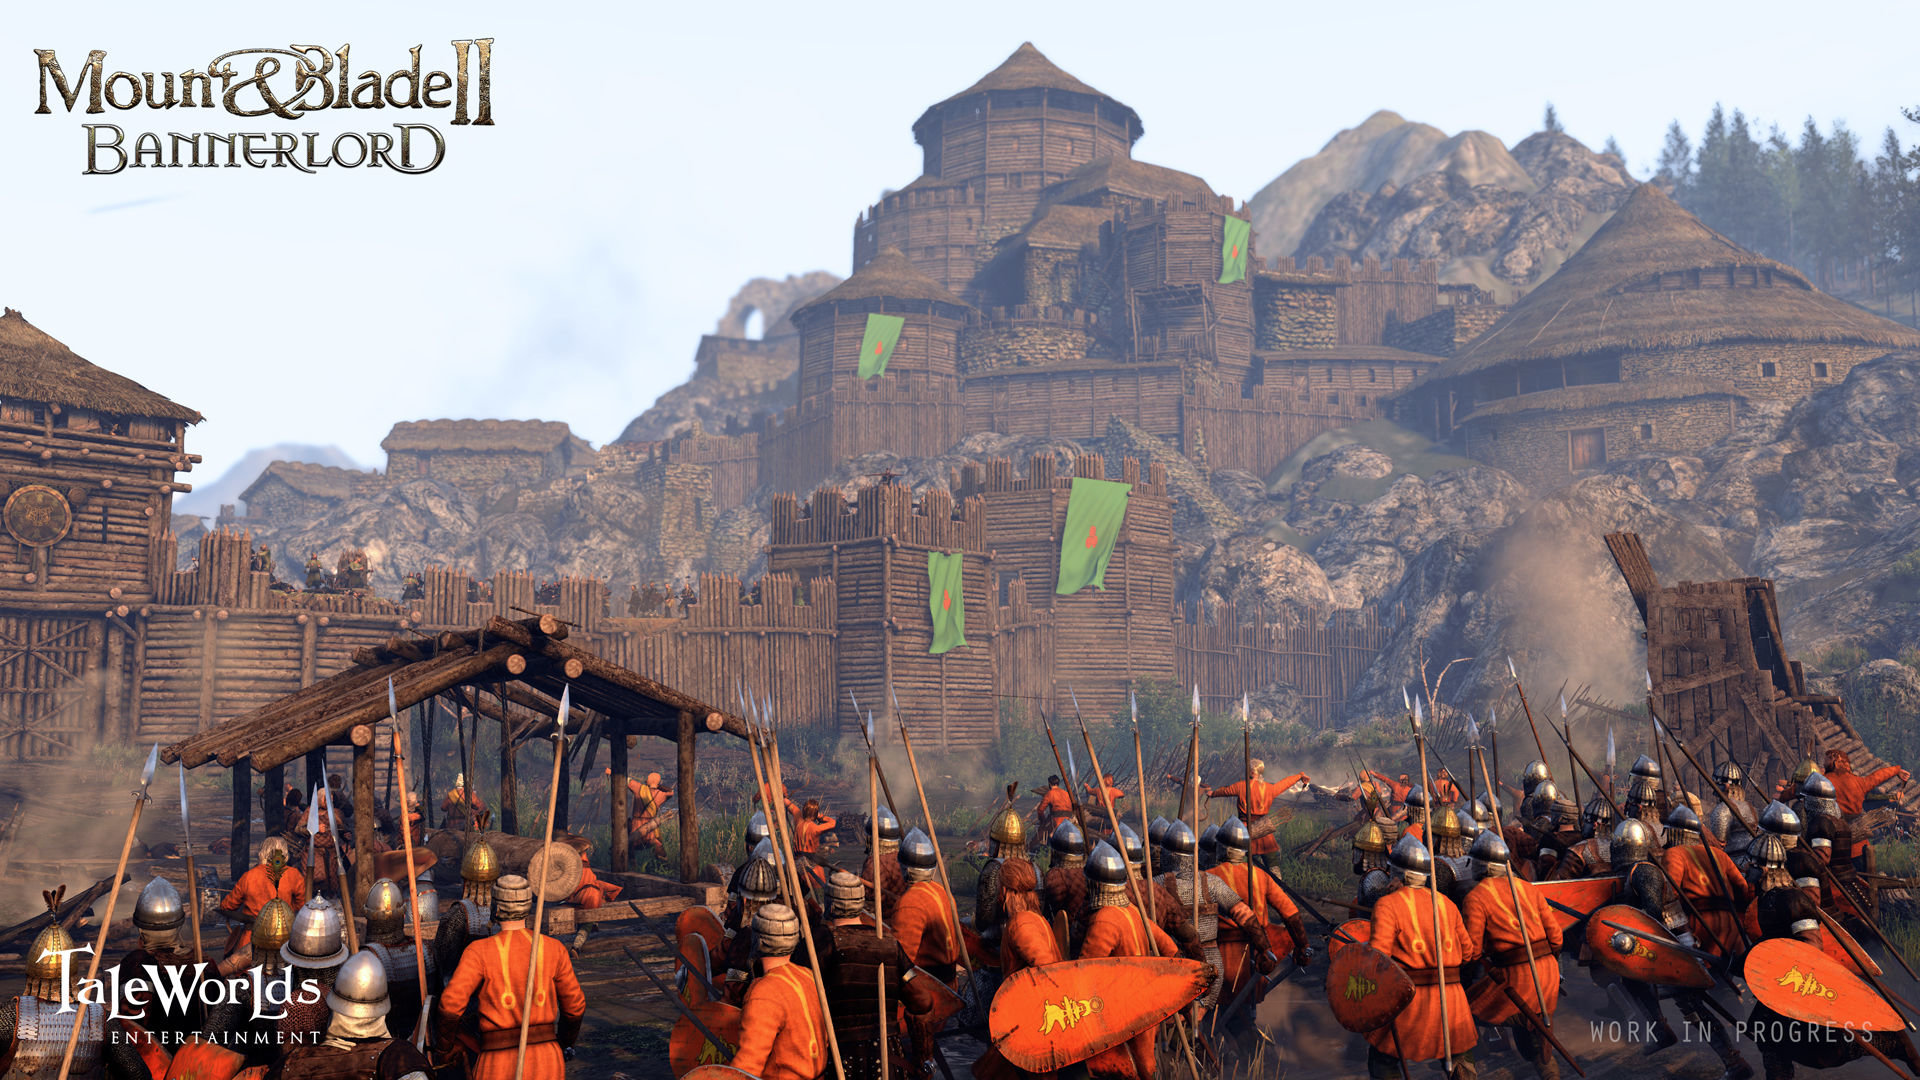 Download full hd 1920x1080 Mount & Blade II: Bannerlord desktop background ID:269632 for free